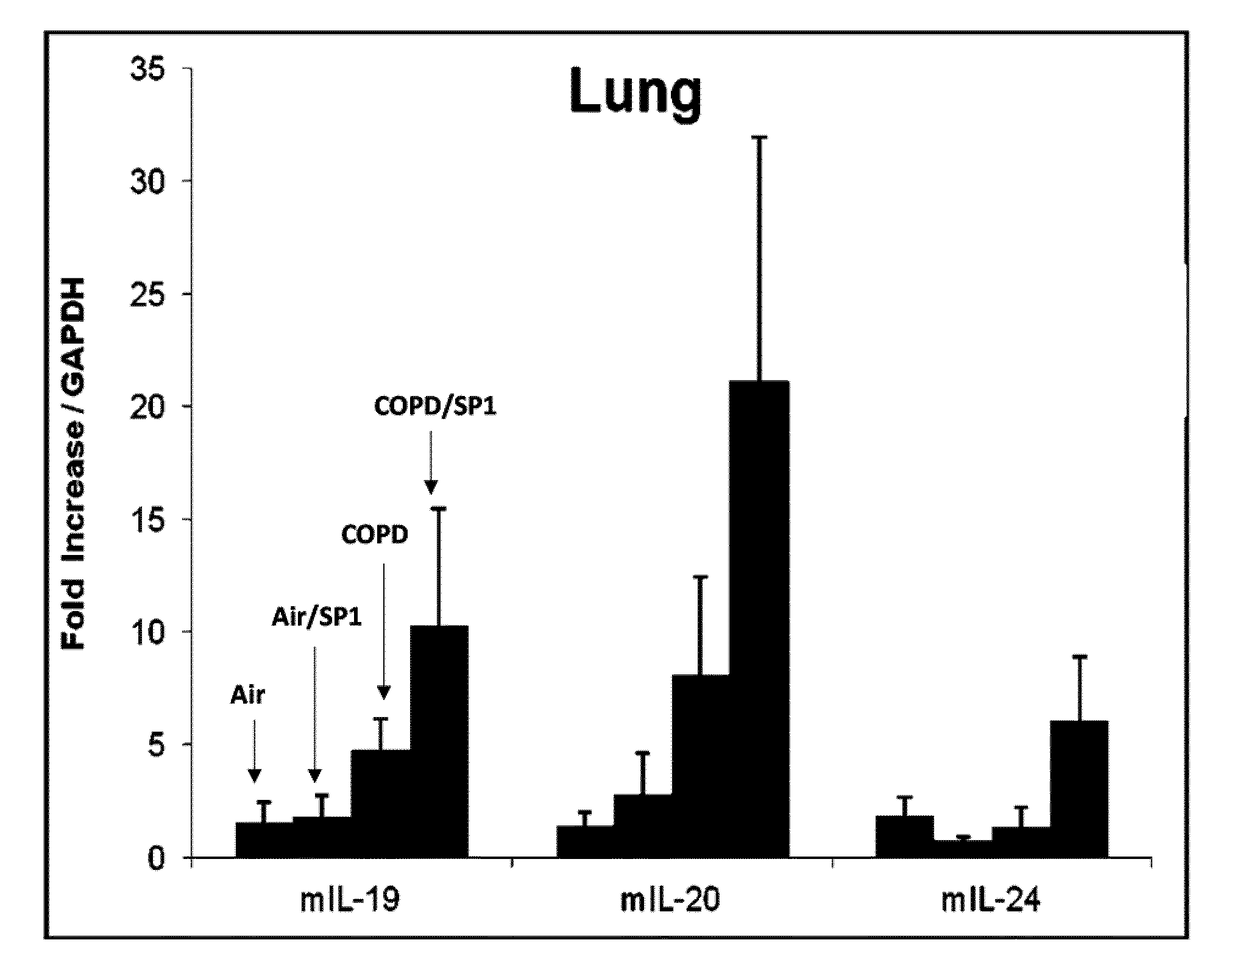 Treatment of acute exacerbations of chronic obstructive pulmonary disease by antagonism of the il-20r